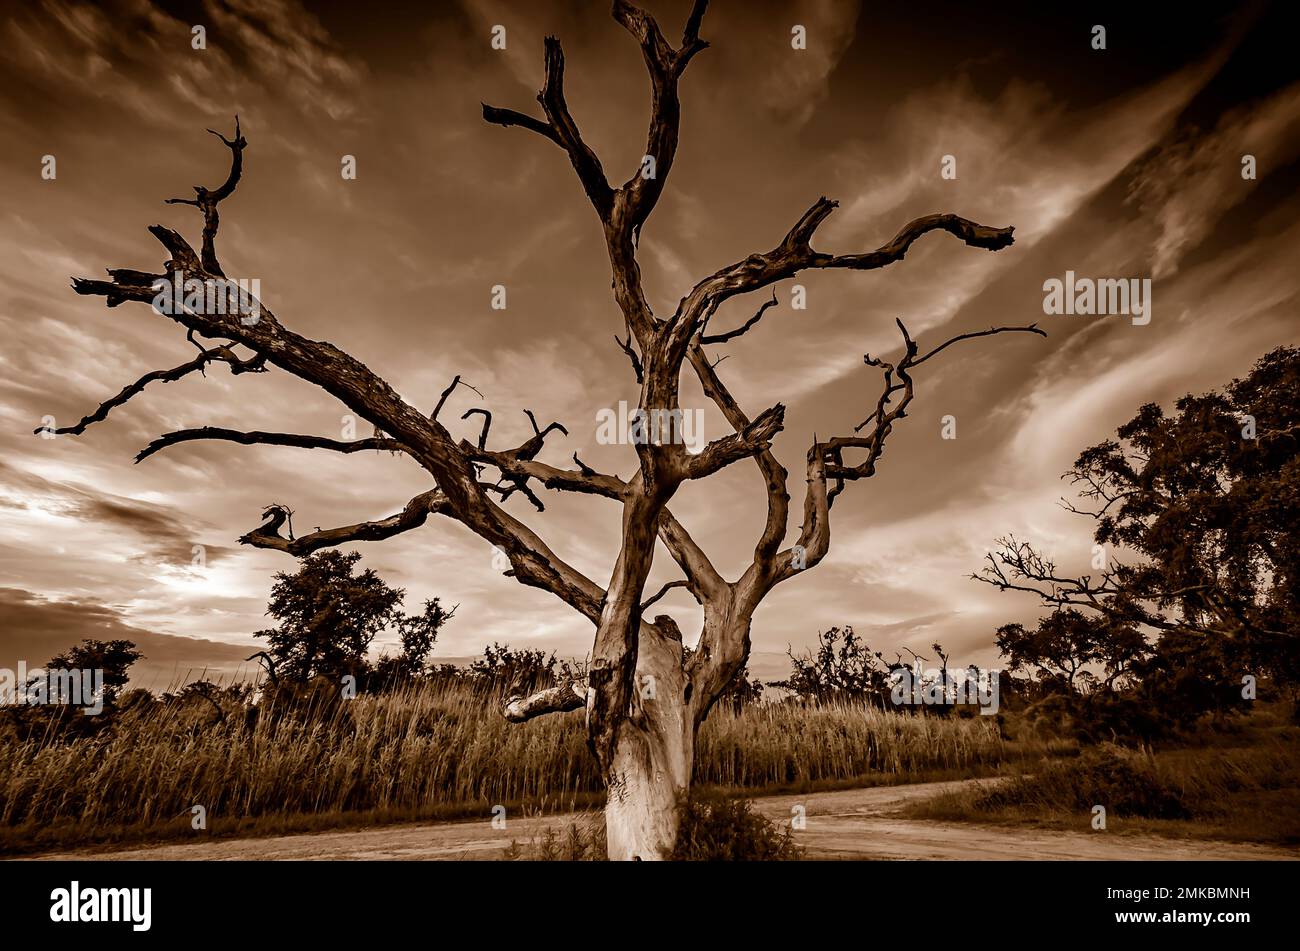 A bare tree is pictured at sunset, June 8, 2015, in Coden, Alabama. The low-lying coastal area was heavily impacted by Hurricane Katrina. Stock Photo